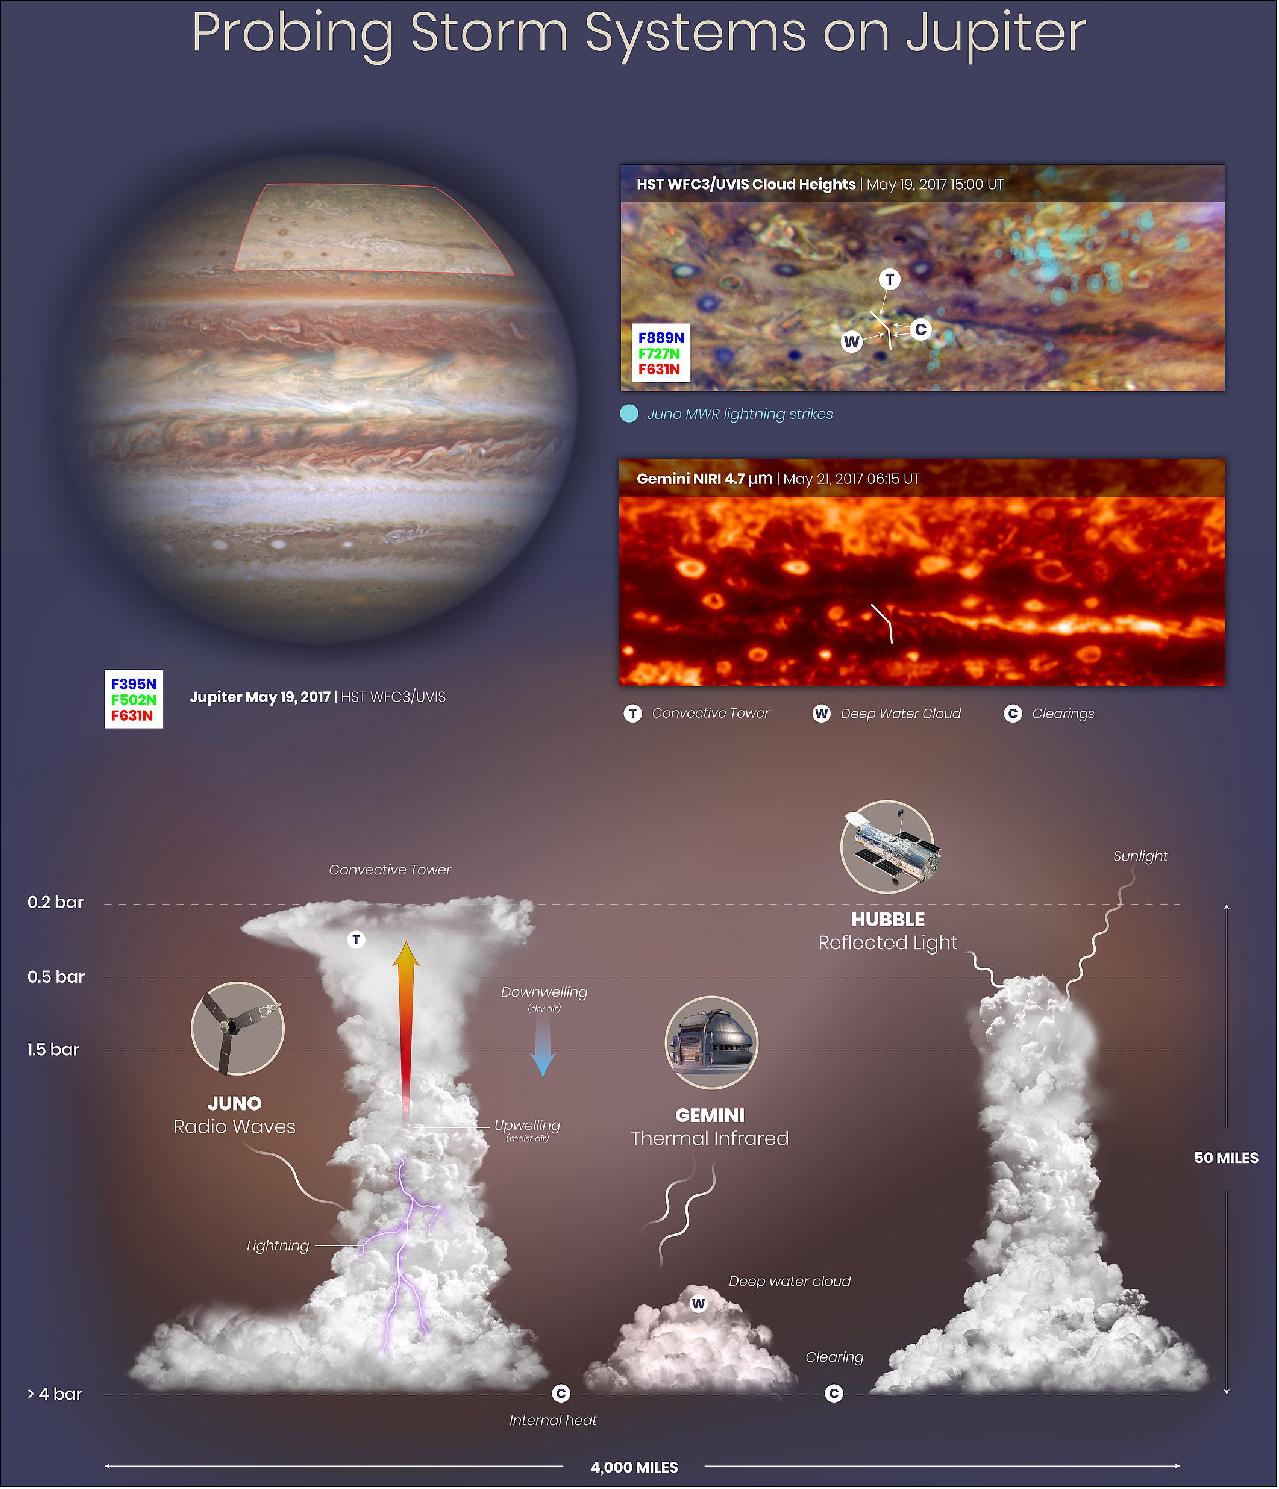 Figure 31: This graphic shows observations and interpretations of cloud structures and atmospheric circulation on Jupiter from the Juno spacecraft, the Hubble Space Telescope and the Gemini Observatory. By combining the Juno, Hubble and Gemini data, researchers are able to see that lightning flashes are clustered in turbulent regions where there are deep water clouds and where moist air is rising to form tall convective towers similar to cumulonimbus clouds (thunderheads) on Earth. The bottom illustration of lightning, convective towers, deep water clouds and clearings in Jupiter's atmosphere is based on data from Juno, Hubble and Gemini, and corresponds to the transect (angled white line) indicated on the Hubble and Gemini map details. The combination of observations can be used to map the cloud structure in three dimensions and infer details of atmospheric circulation. Thick, towering clouds form where moist air is rising (upwelling and active convection). Clearings form where drier air sinks (downwelling). The clouds shown rise five times higher than similar convective towers in the relatively shallow atmosphere of Earth. The region illustrated covers a horizontal span one-third greater than that of the continental United States [image credits: NASA, ESA, M.H. Wong (UC Berkeley), A. James and M.W. Carruthers (STScI), and S. Brown (JPL)]